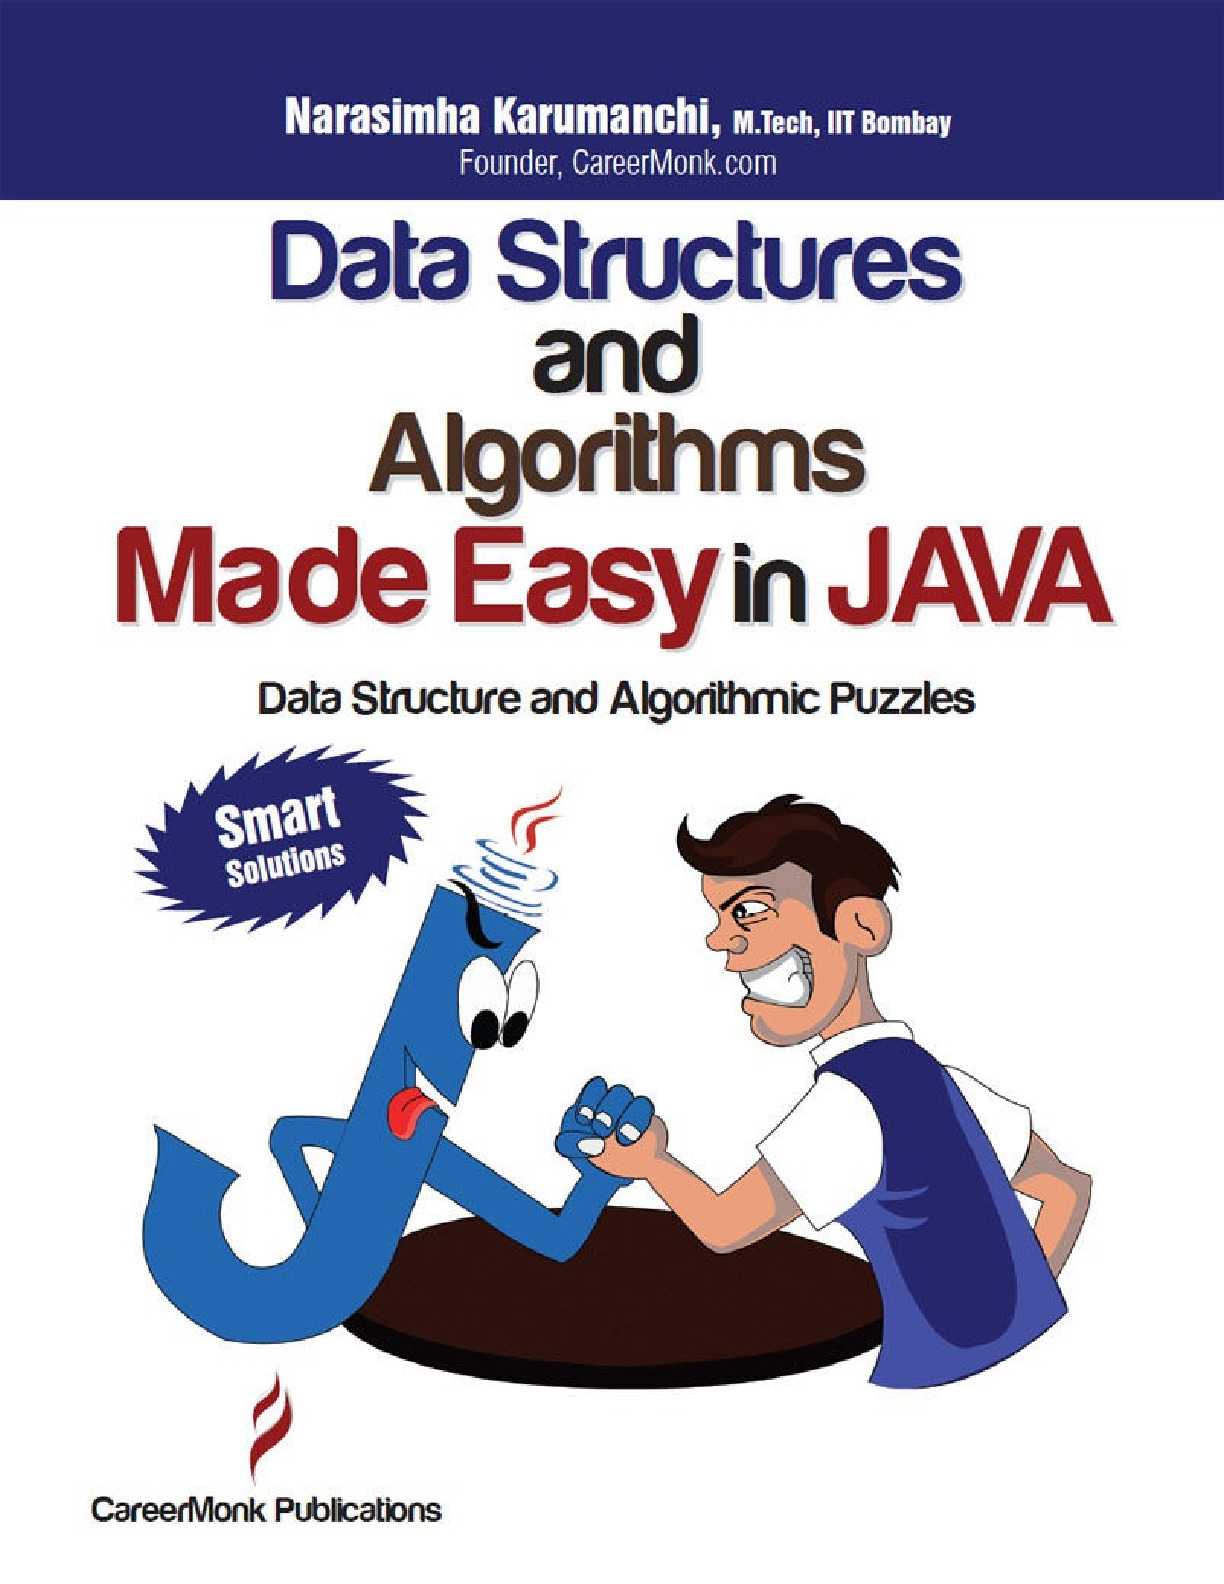 Data Structures and Algorithms Made Easy in Java – Narasimha Karumanchi